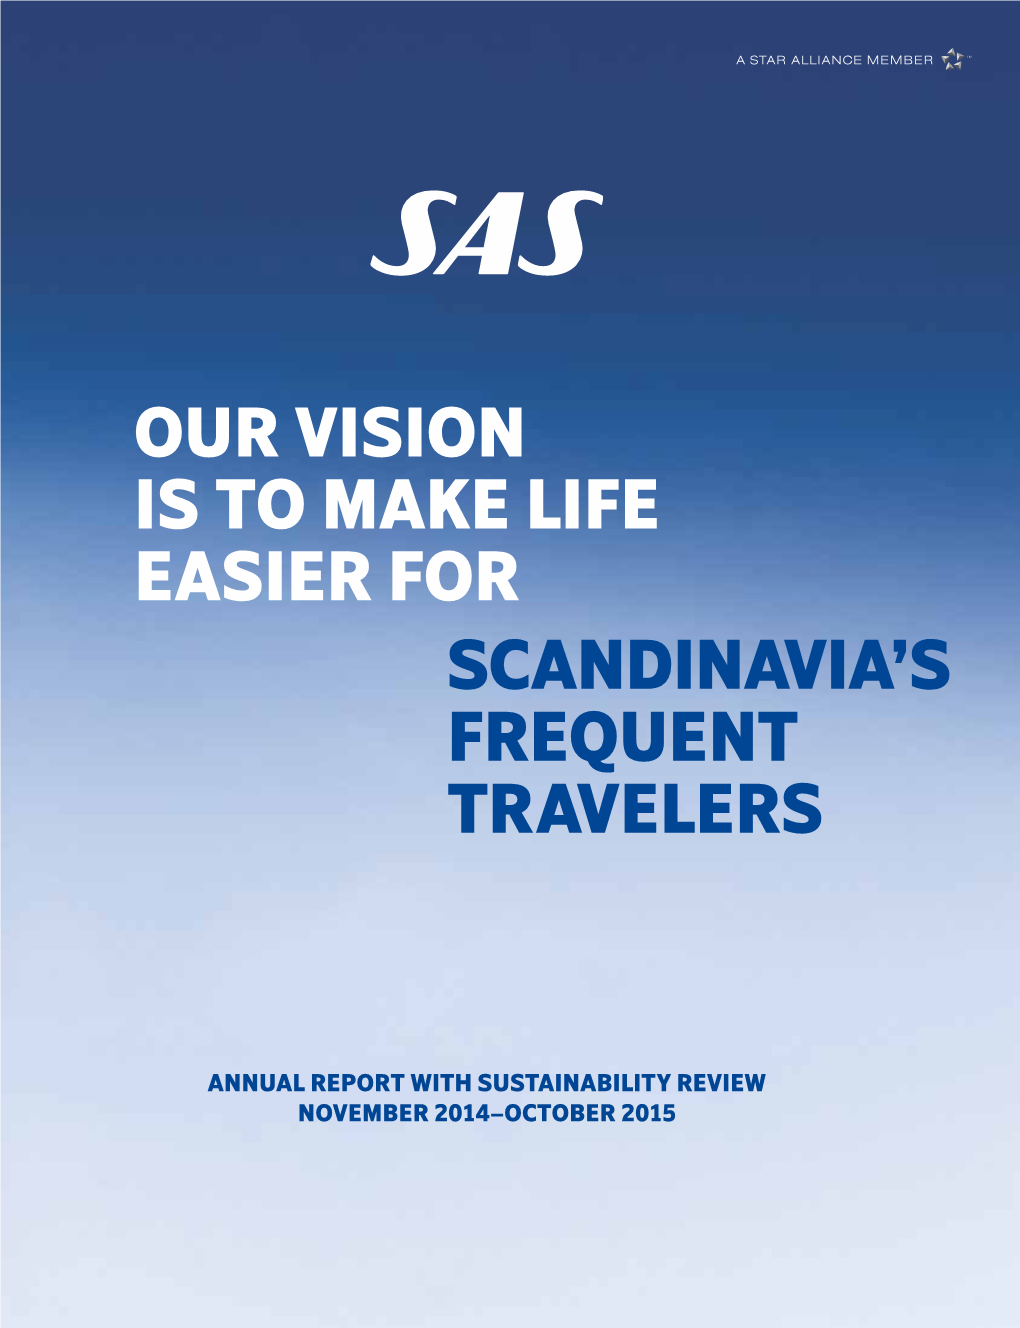 Our Vision Is to MAKE Life Easier for Scandinavia's